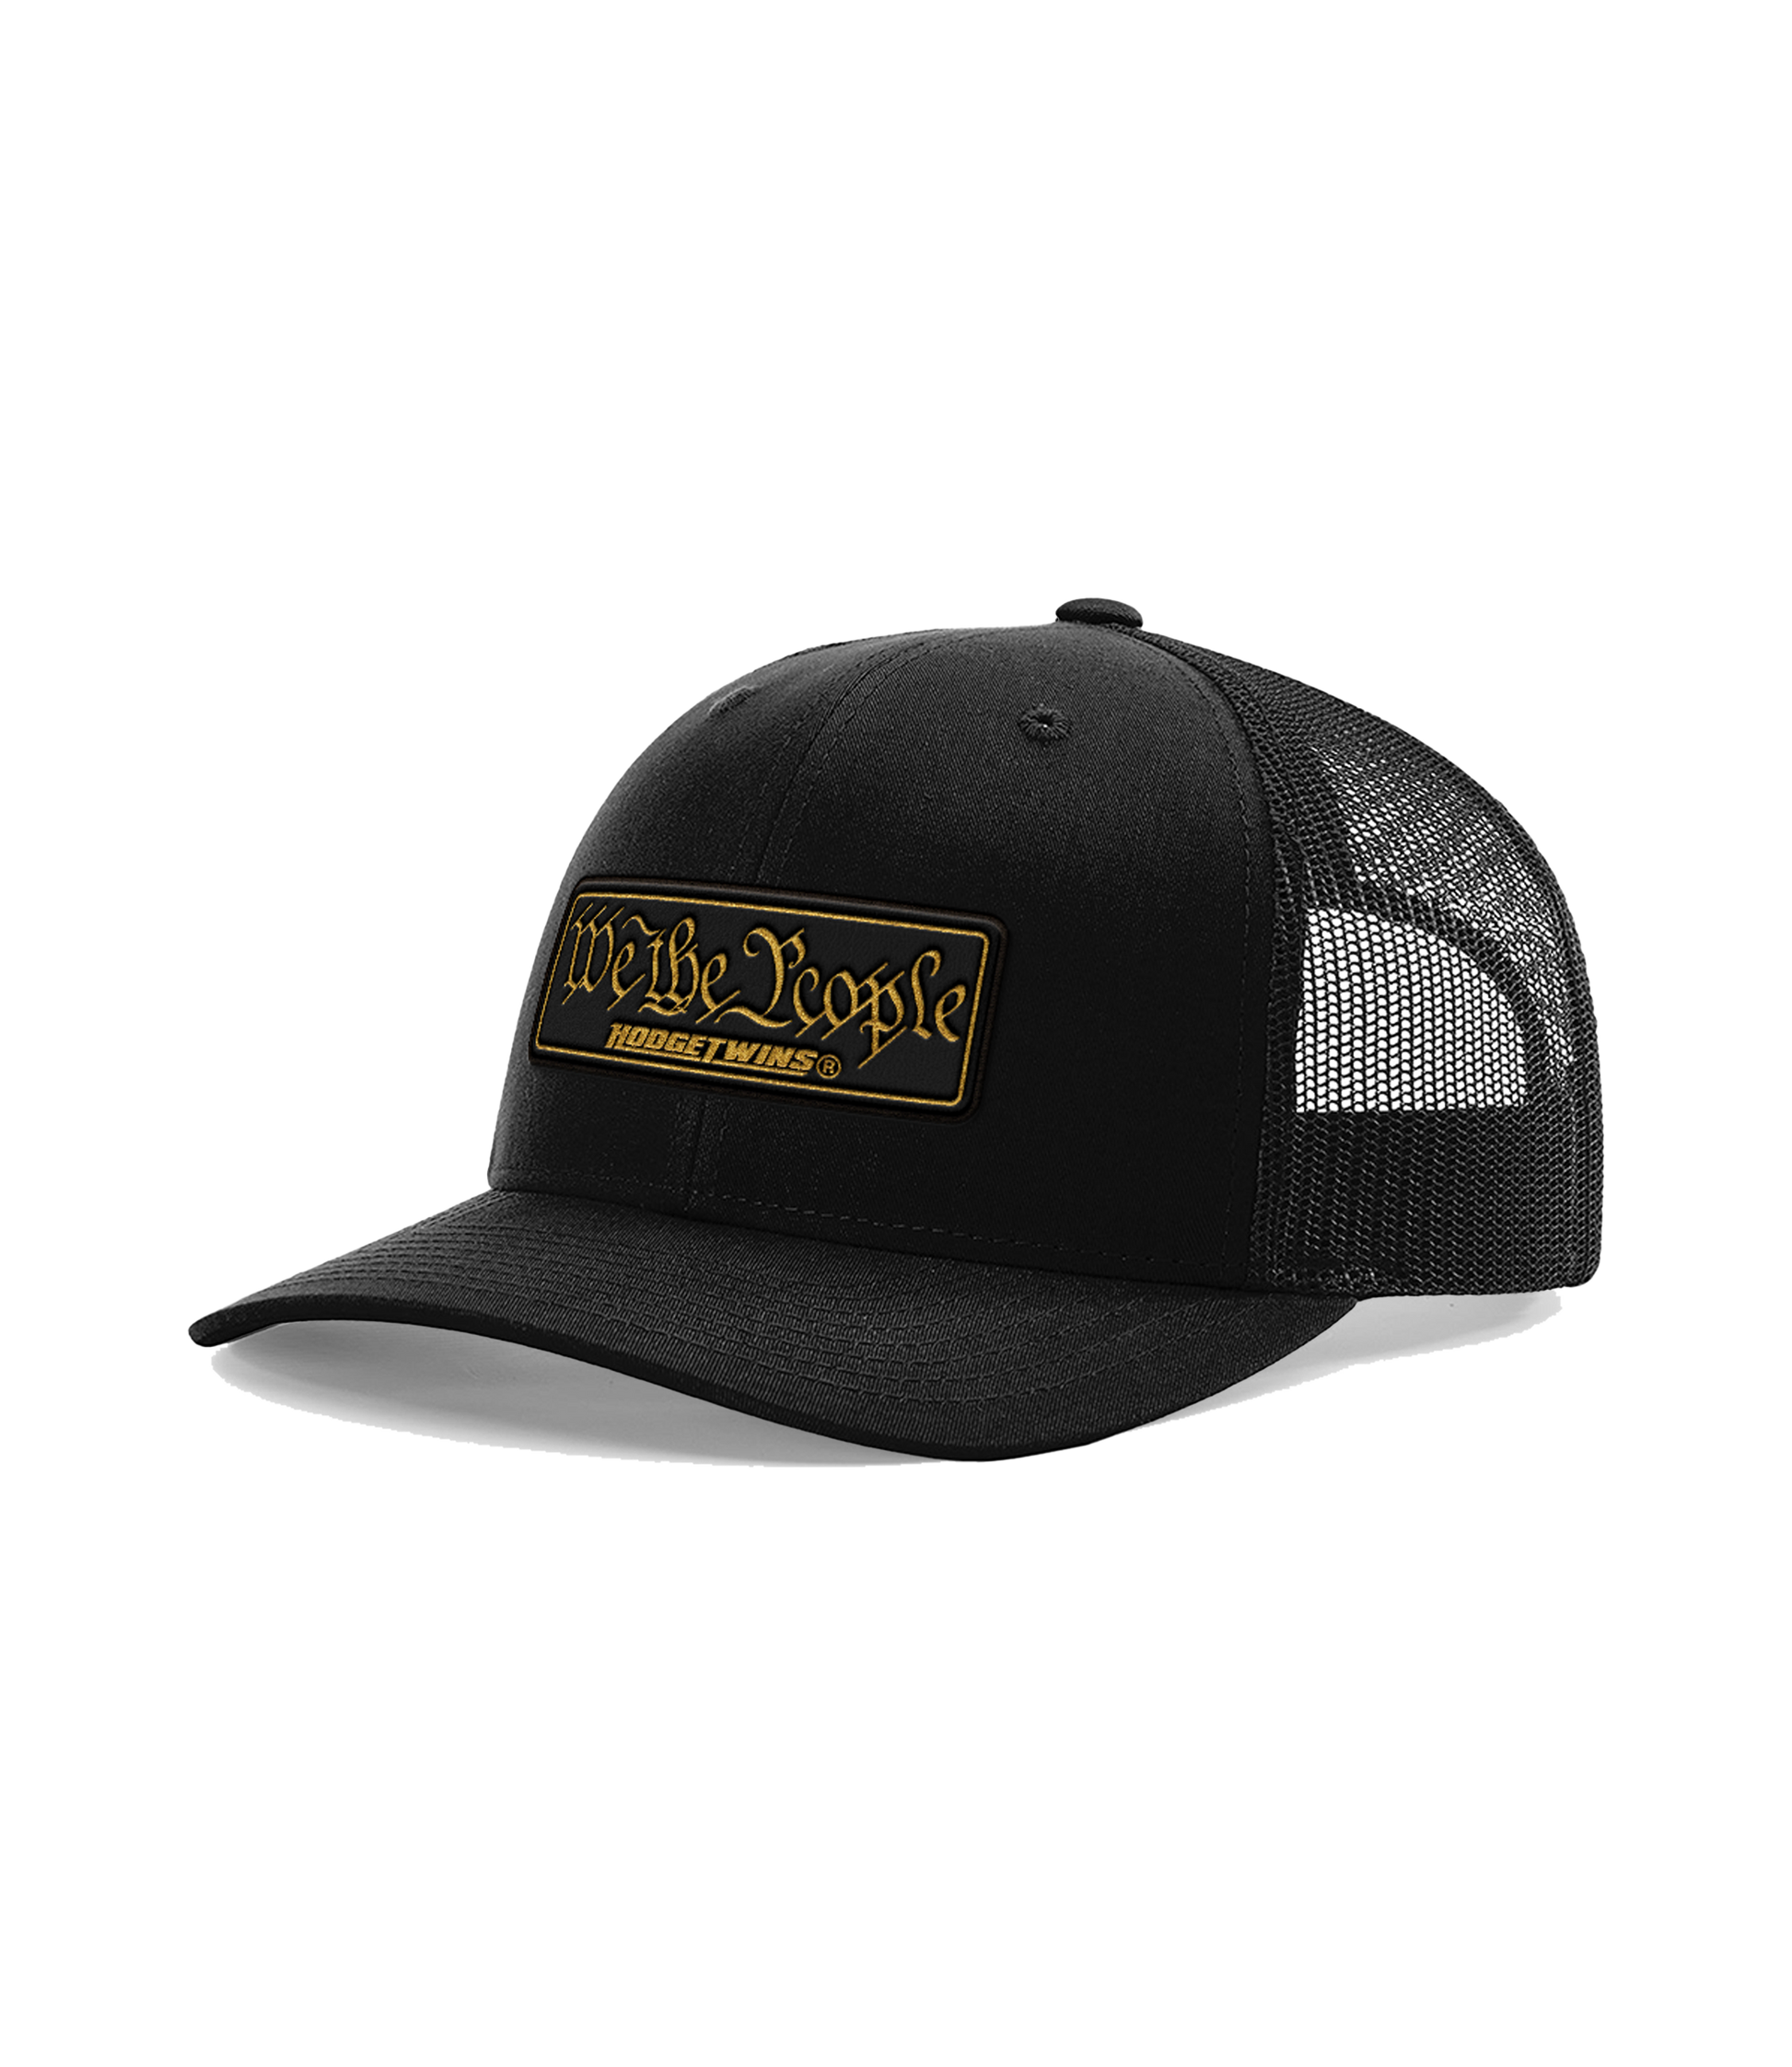 Black OSFA mesh hat with a black and gold leather patch that reads We The People